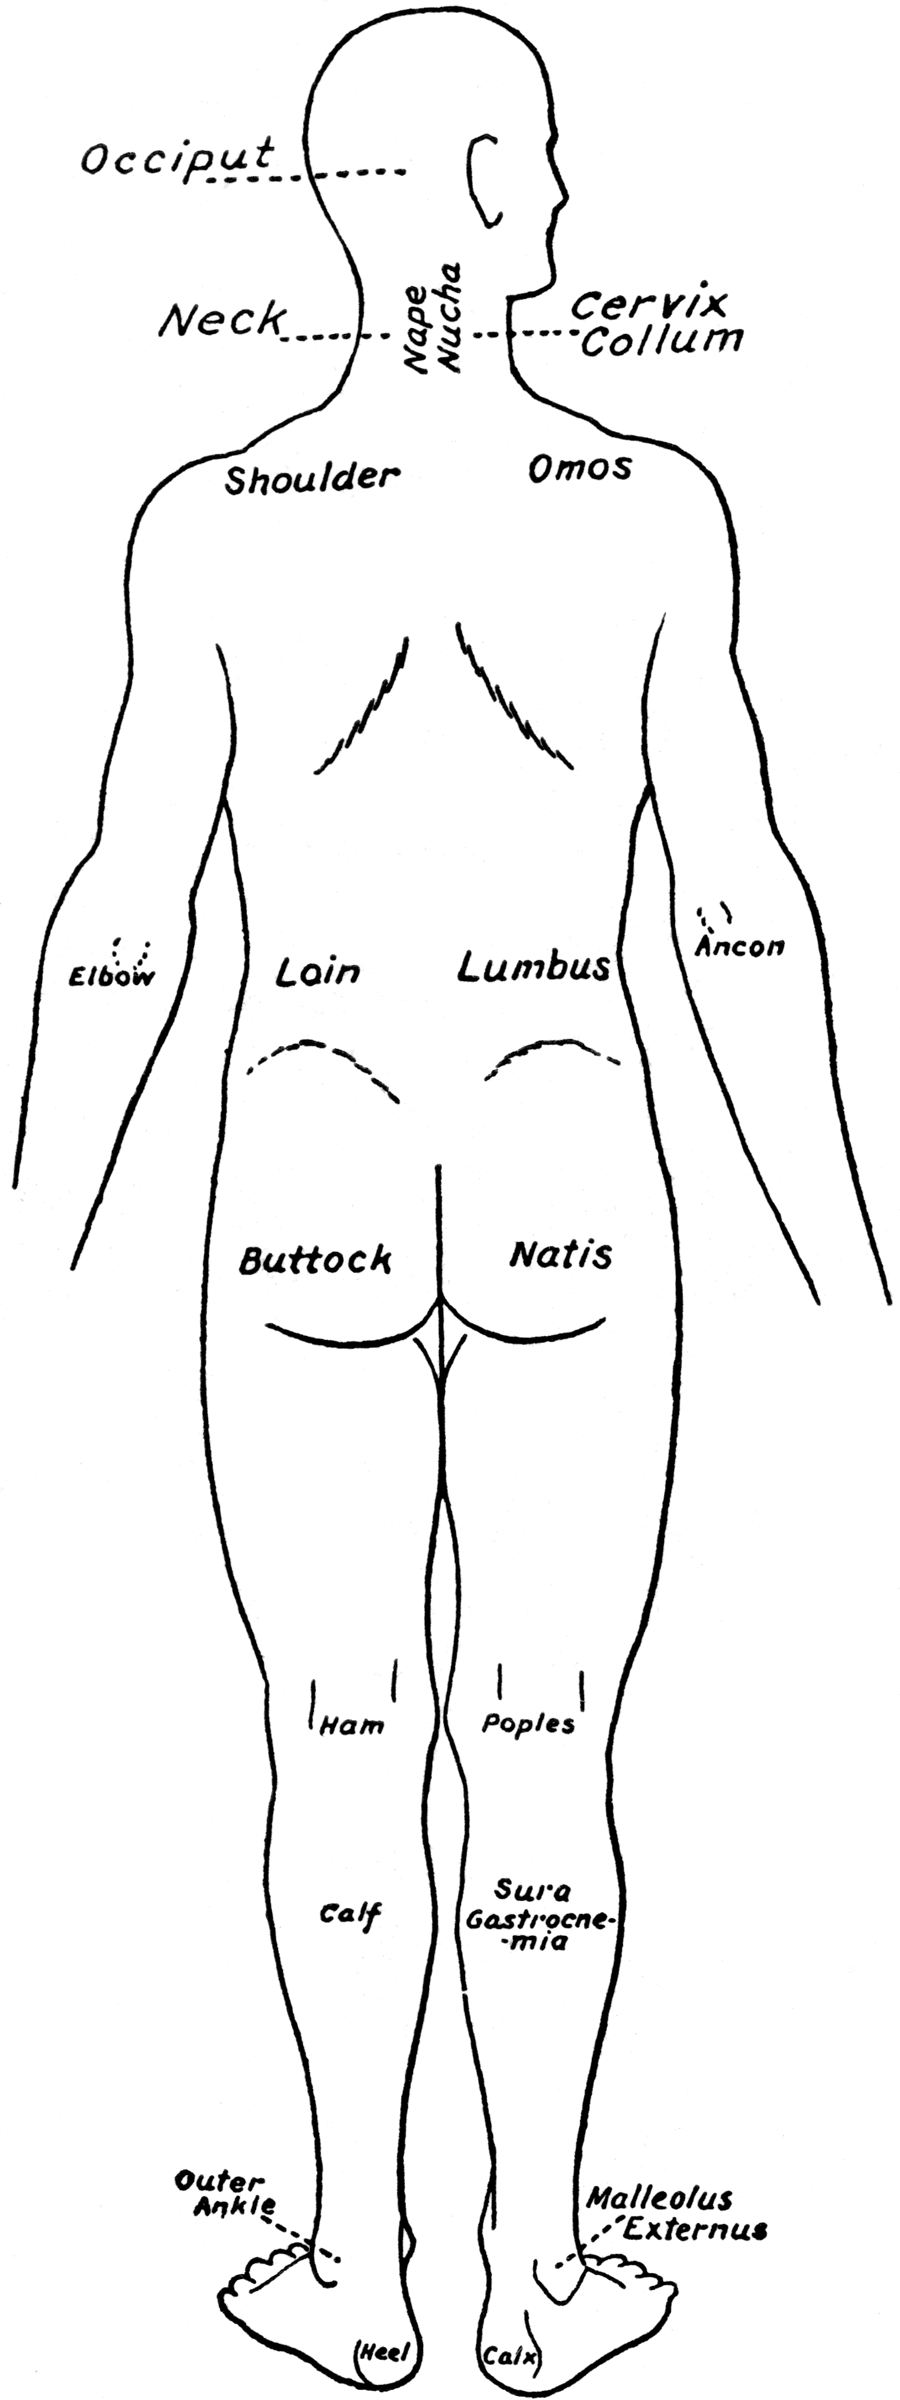 Back View of the Parts of the Human Body Labeled in English and Latin